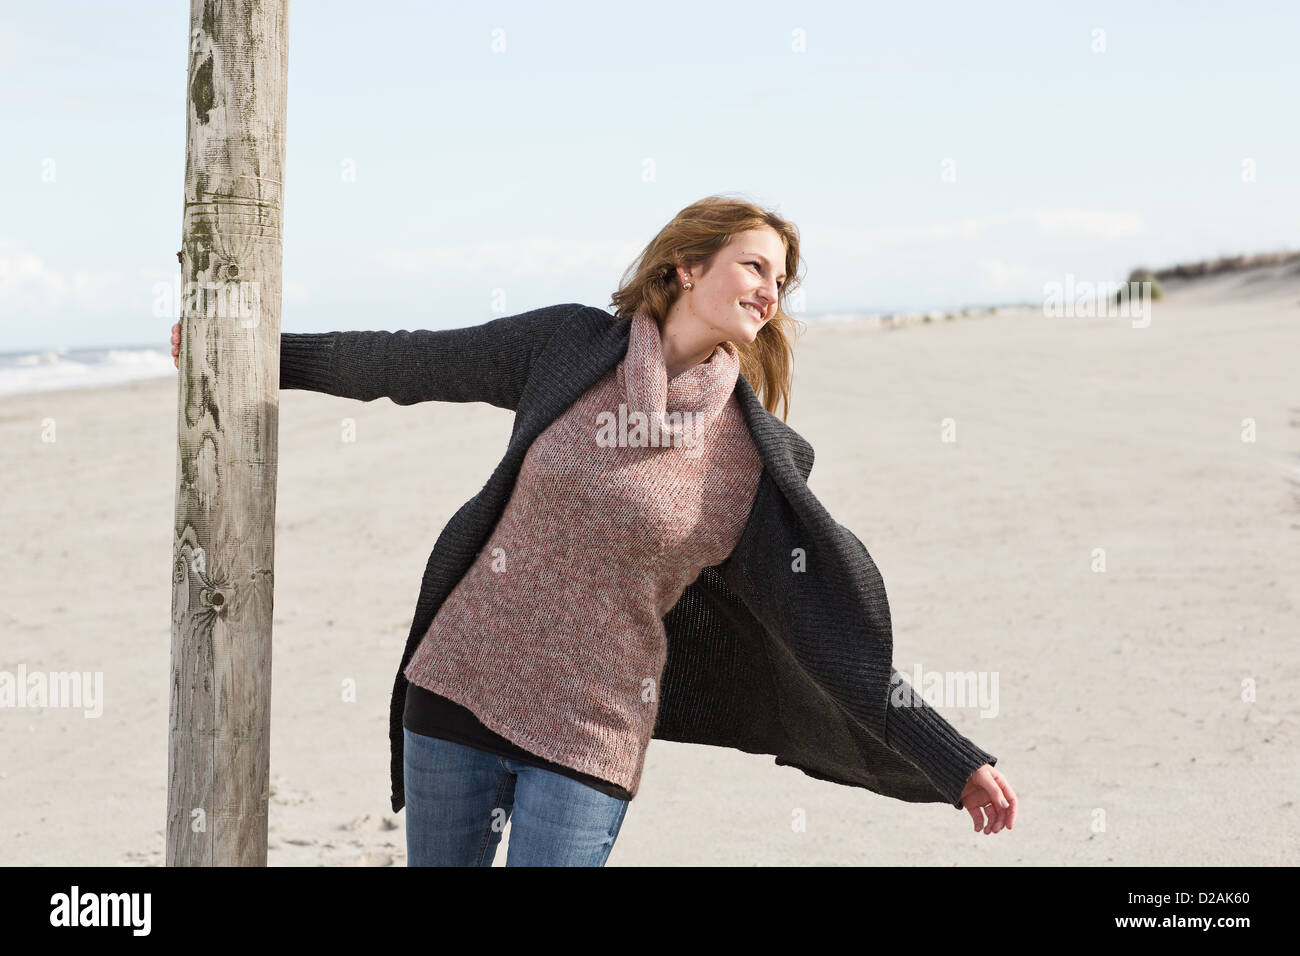 Woman swinging from pole on beach Stock Photo